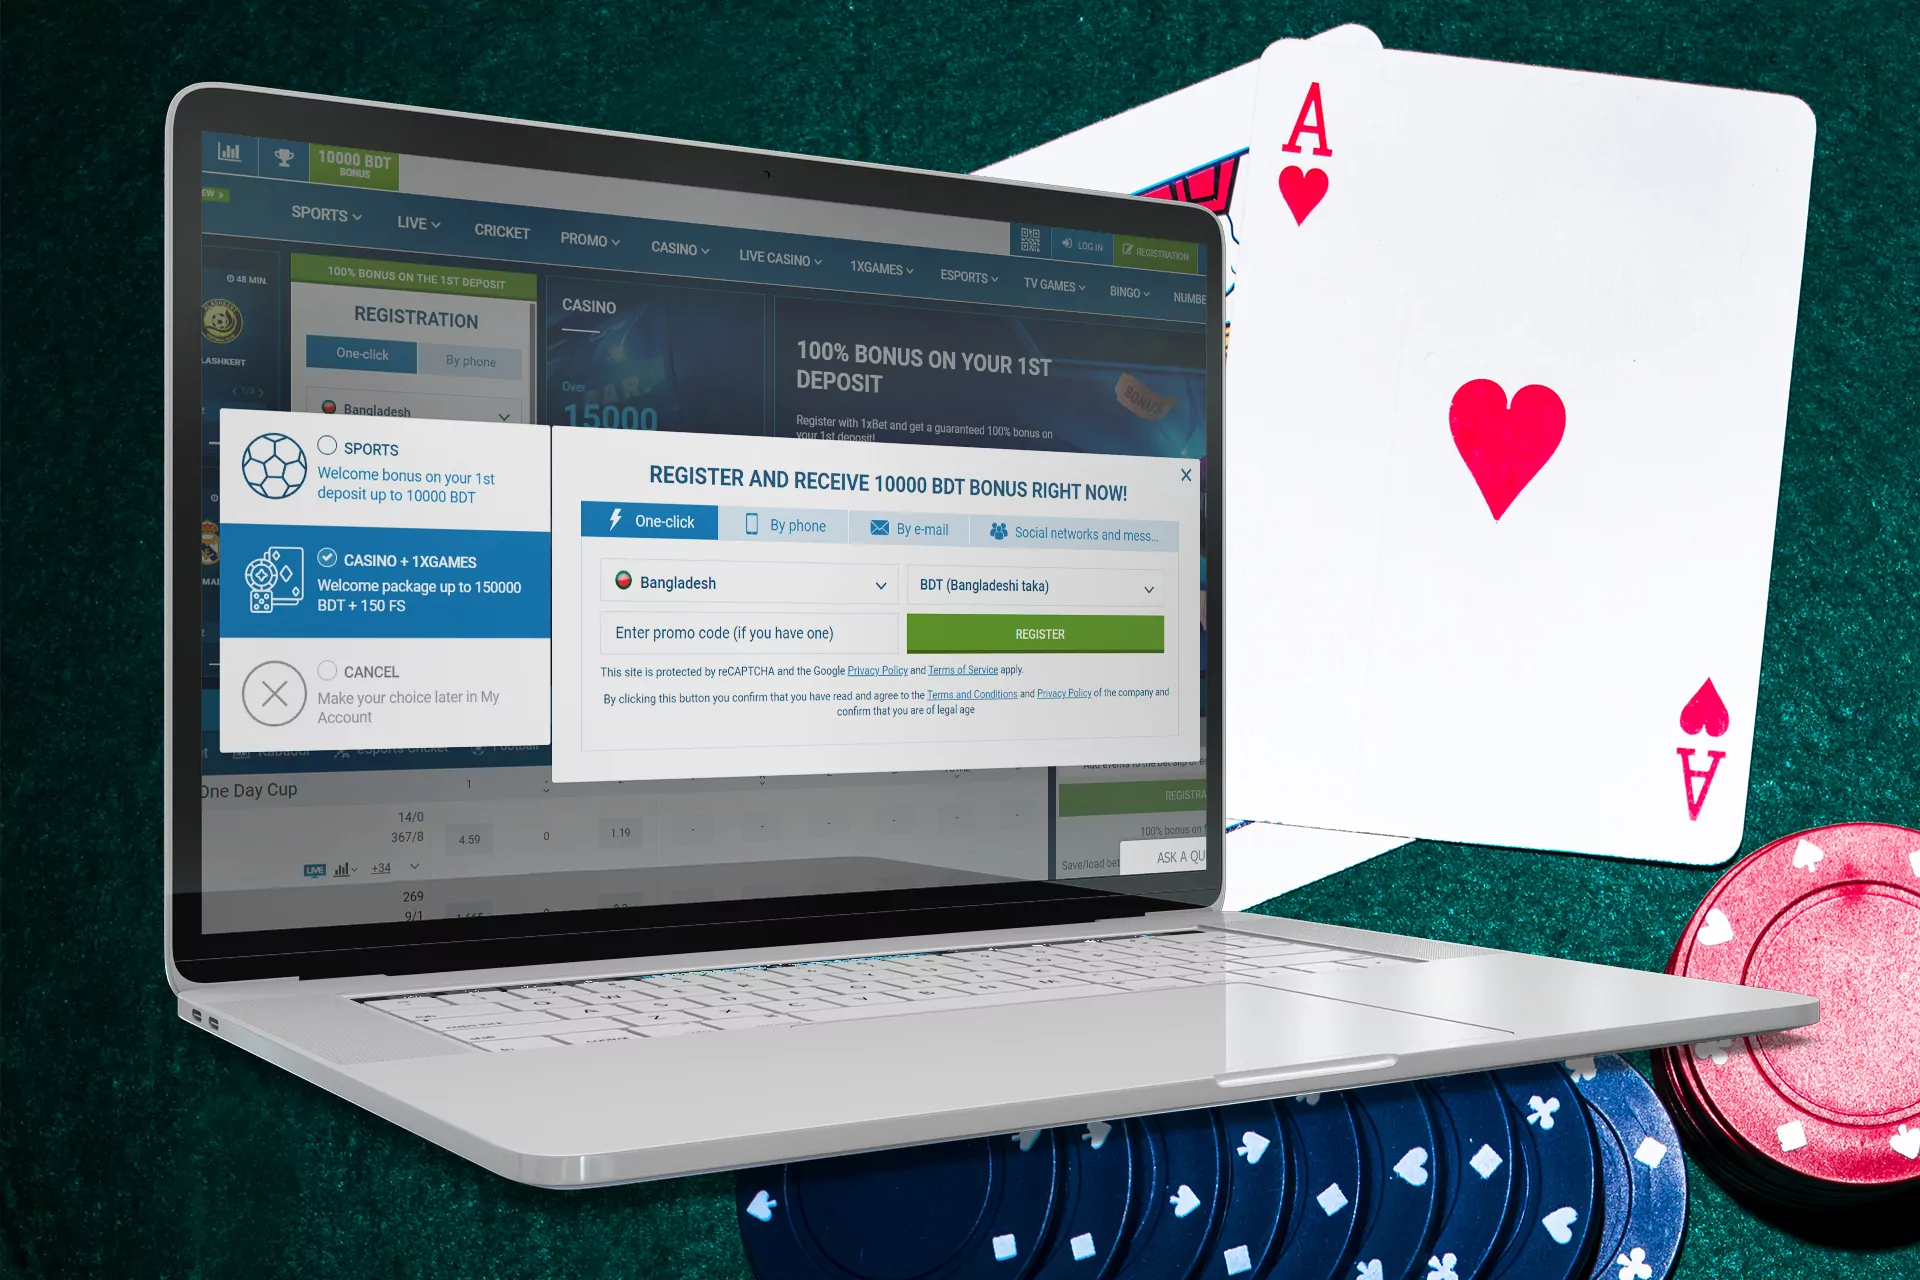 Go to the online casino's official website and create an account.